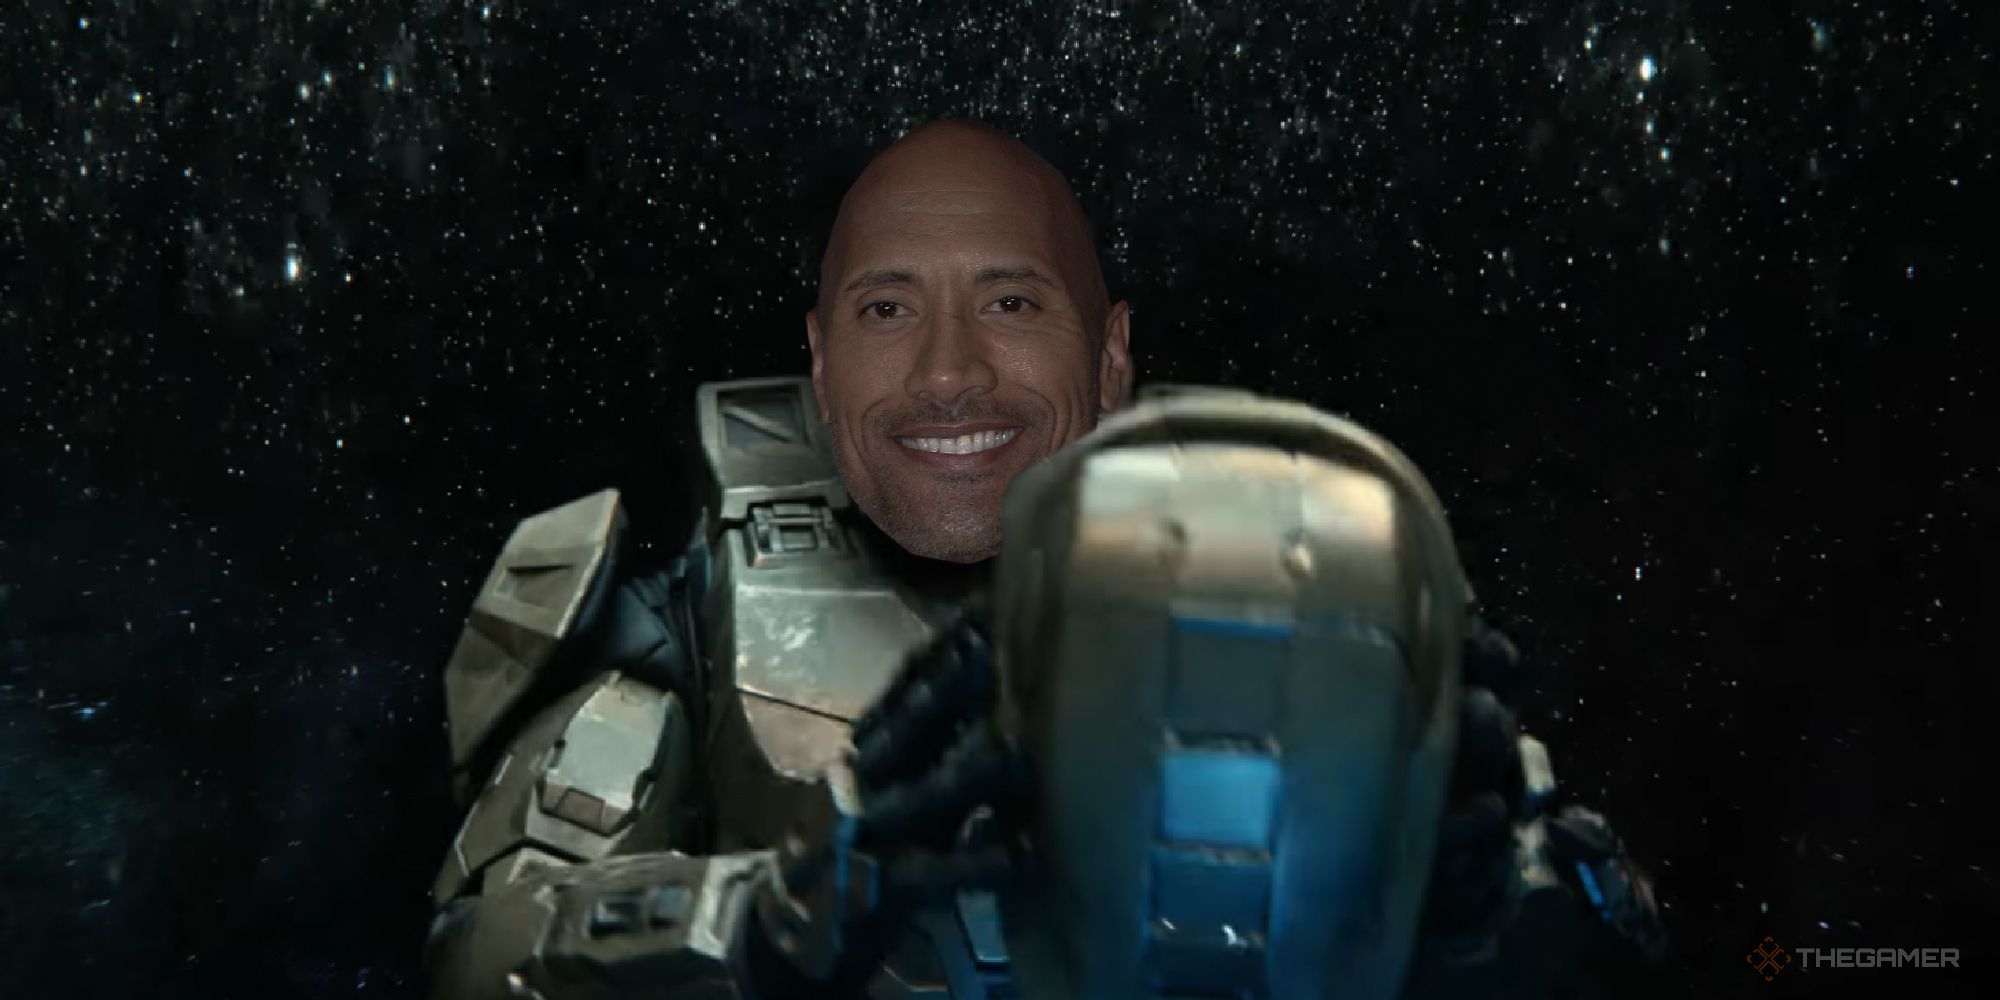 Master Chief The Rock